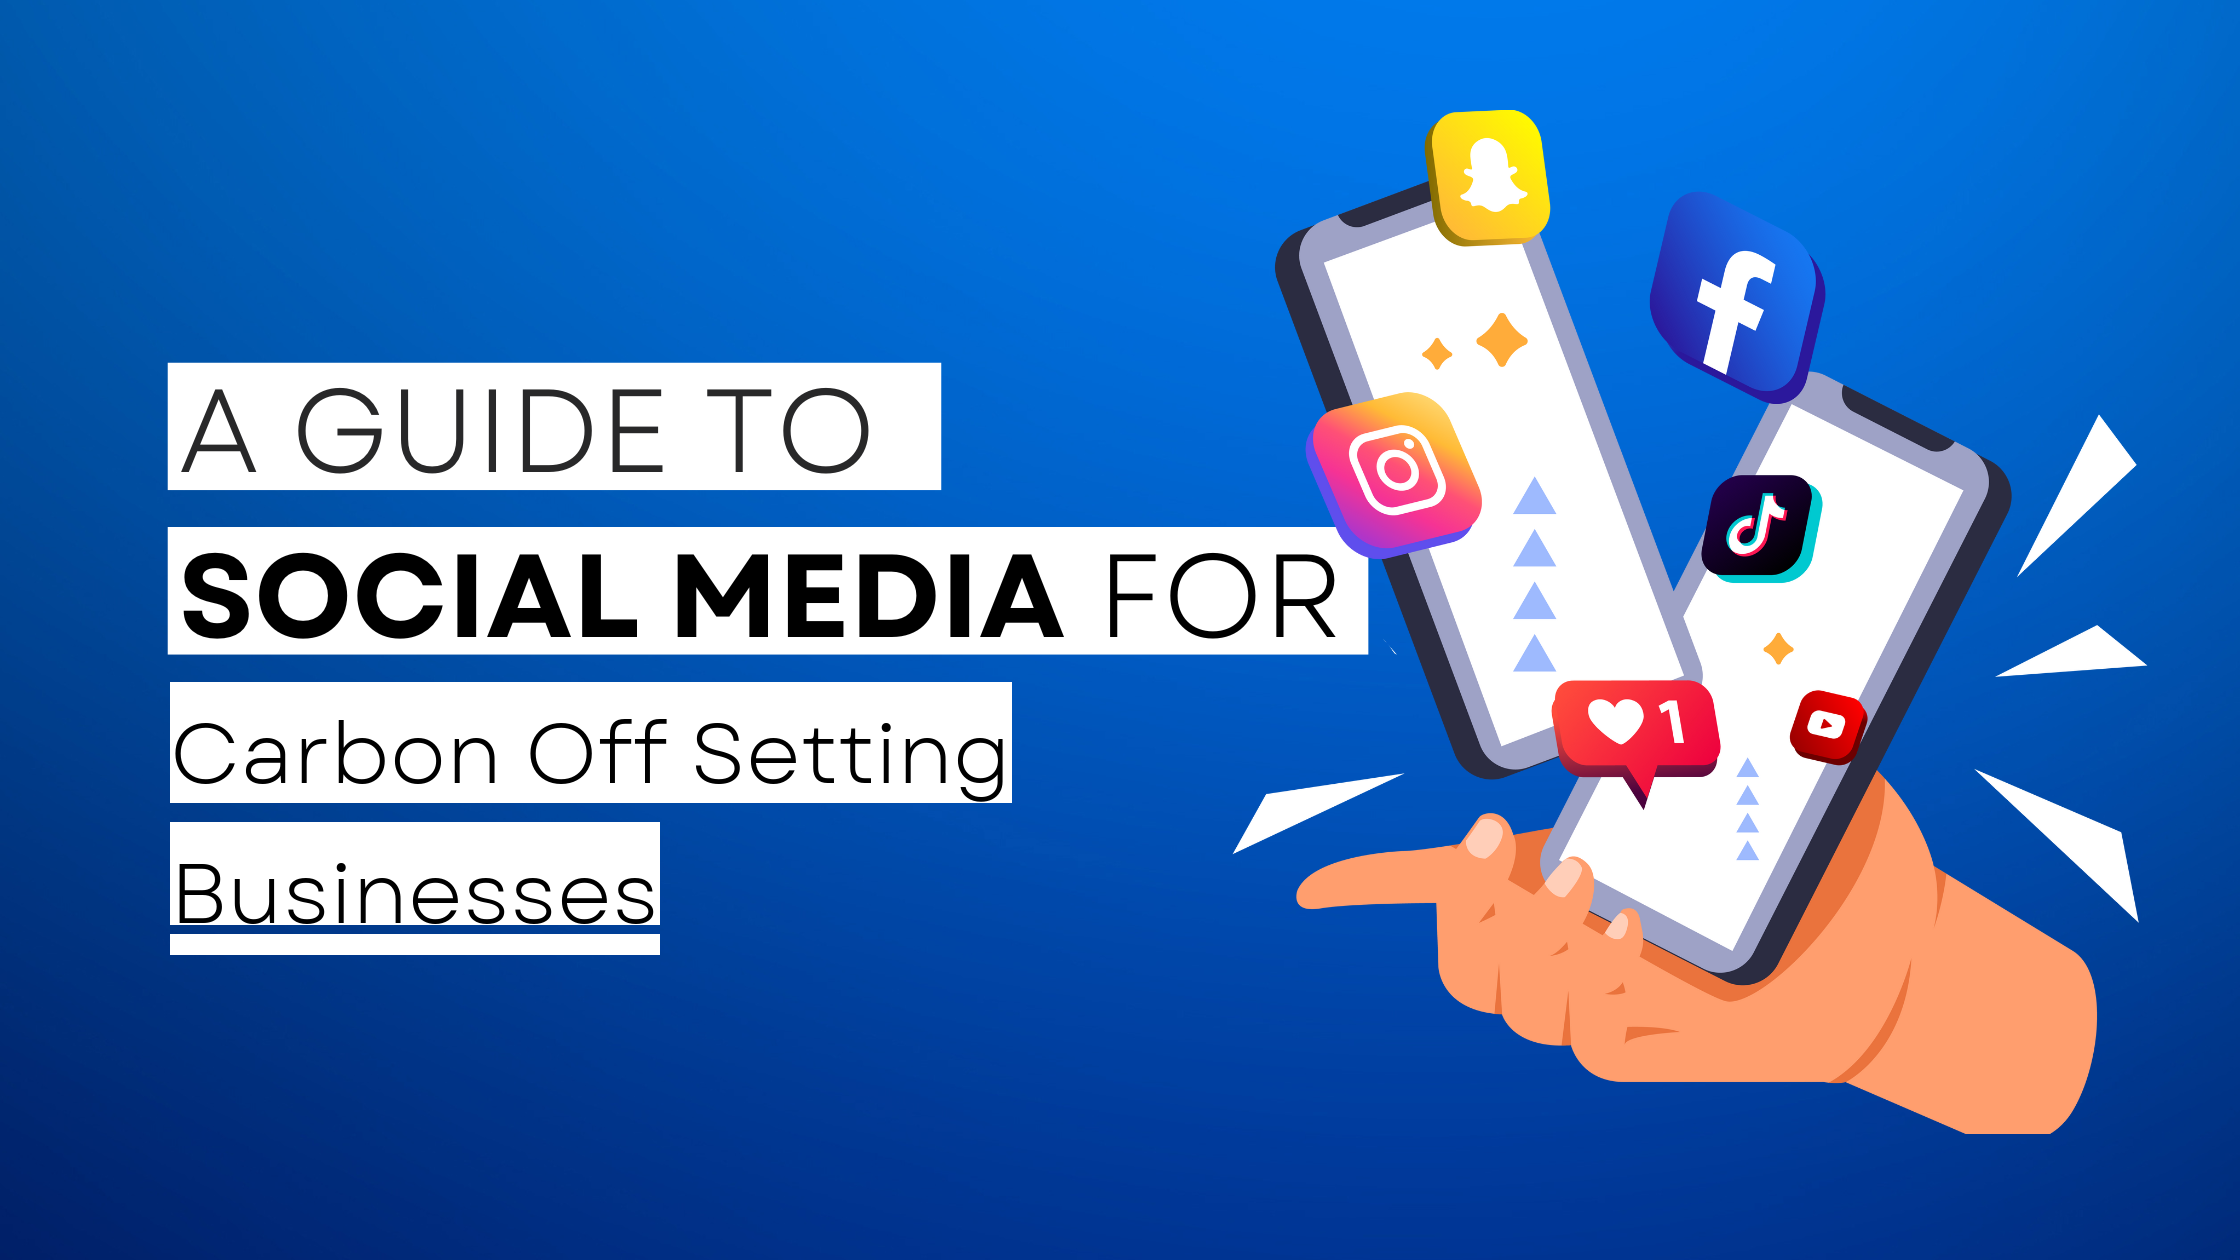 How to start Carbon Off Setting on social media